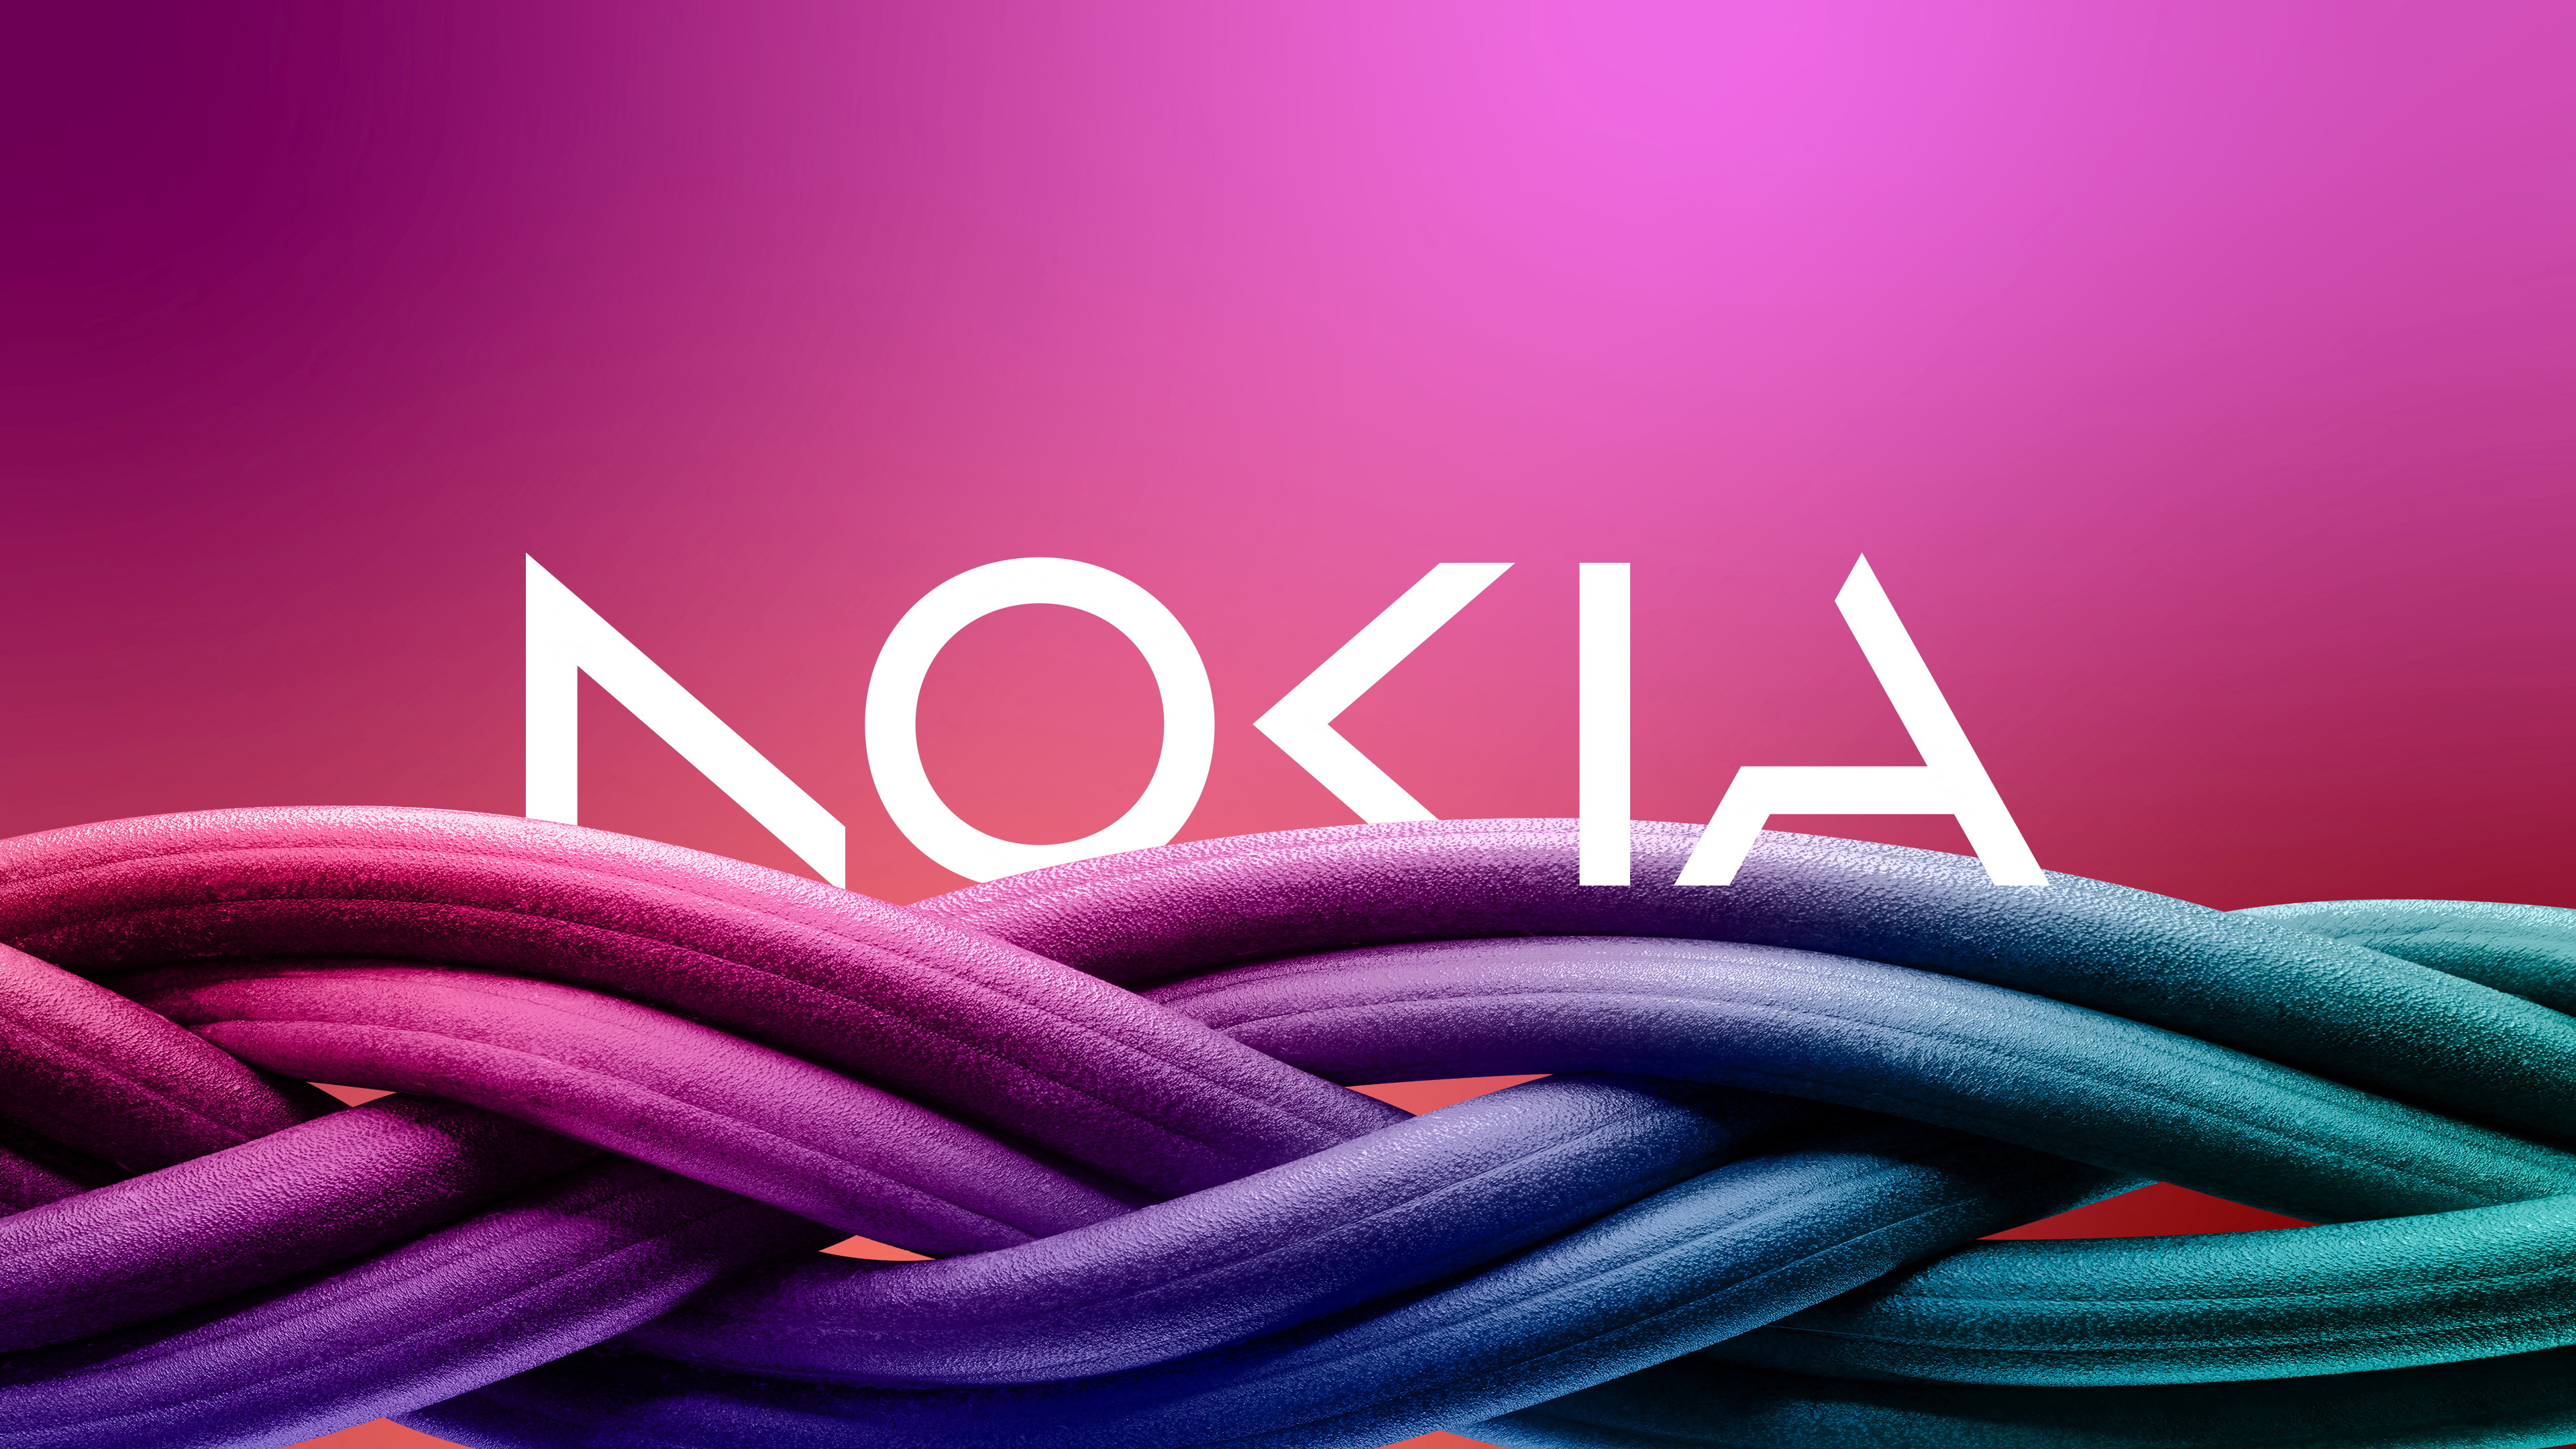 Nokia to Change its Brand Identity After 60 Years with a New Logo as the Former Top Phone Maker Focuses on Aggressive Growth